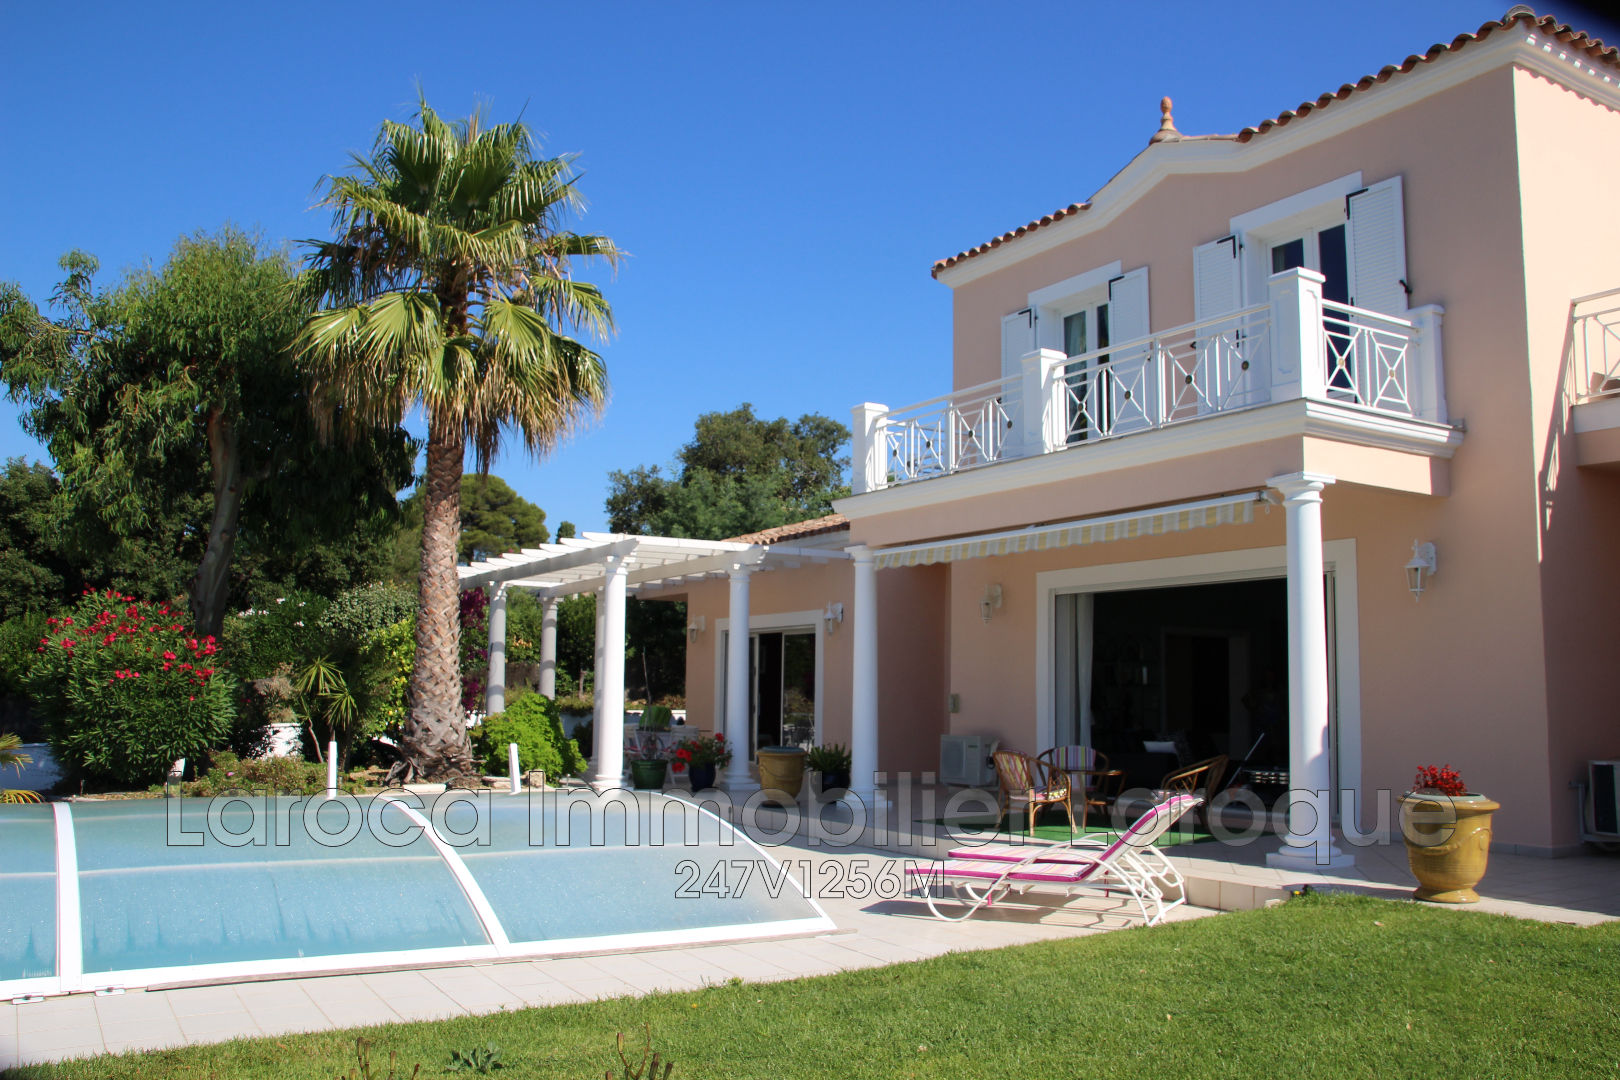 4 bed House - Villa For Sale in St Raphael area, 